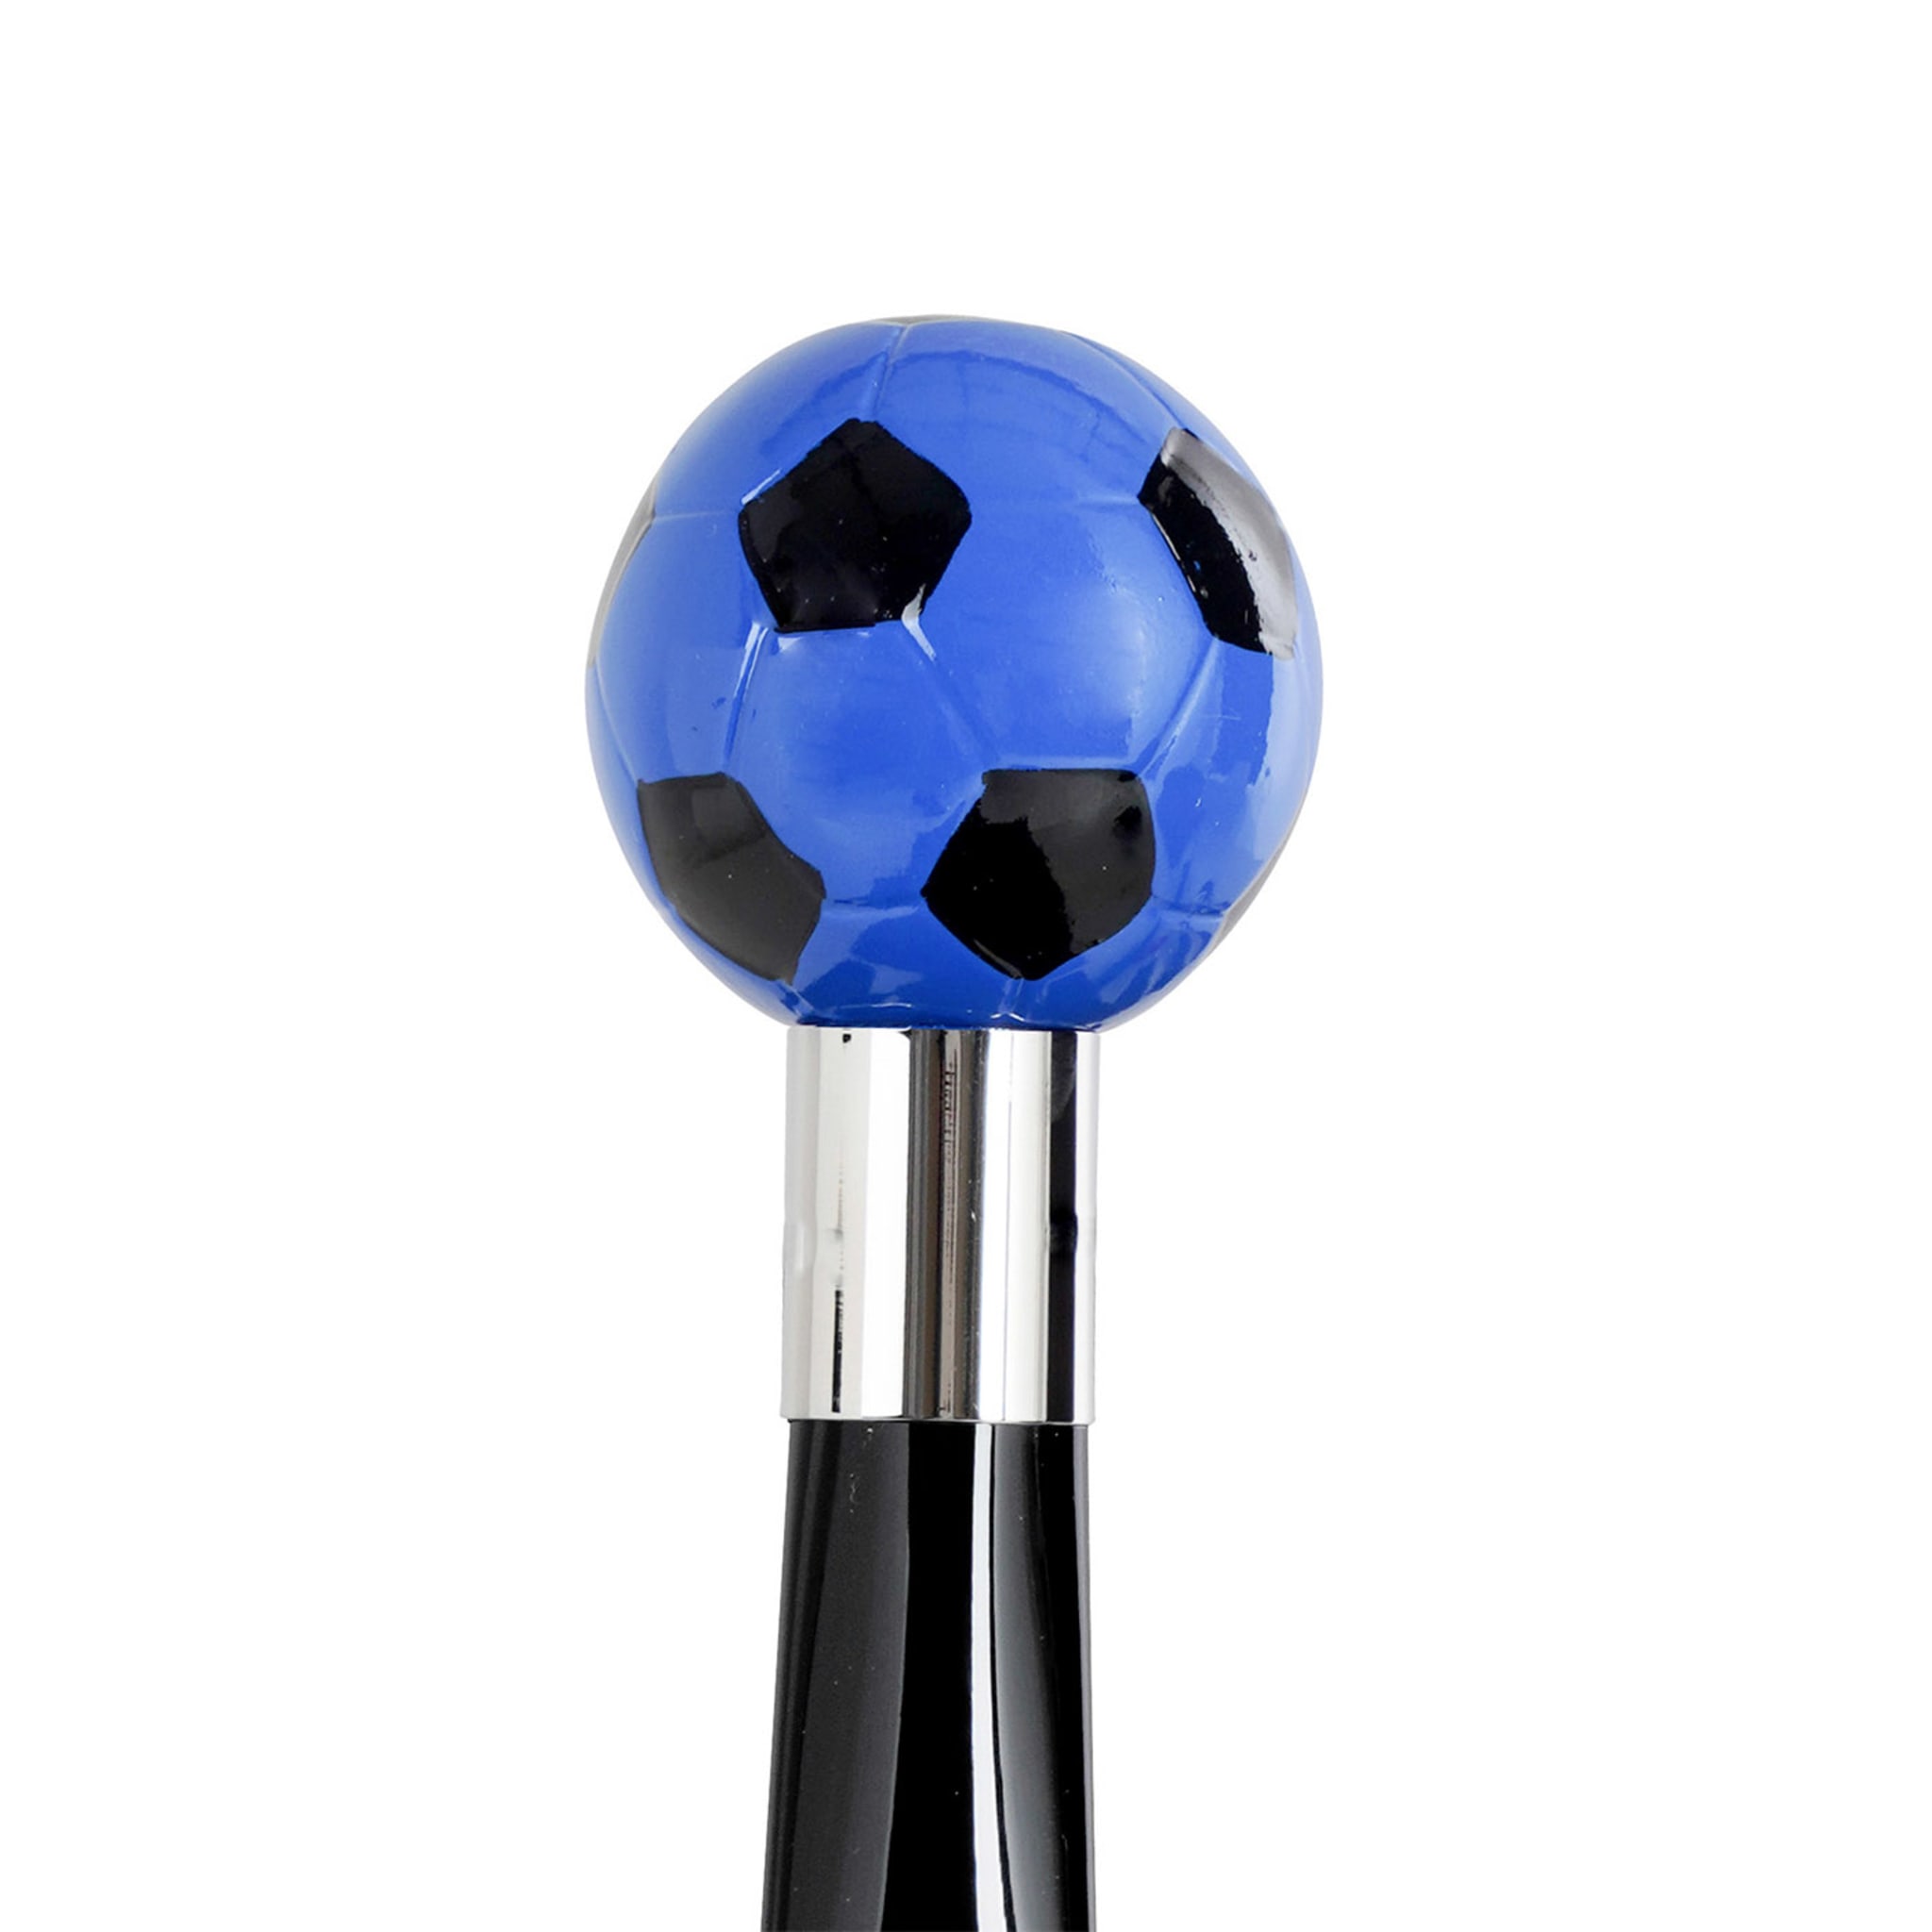 Calcio Small Black & Blue Decorated Shoehorn - Alternative view 1